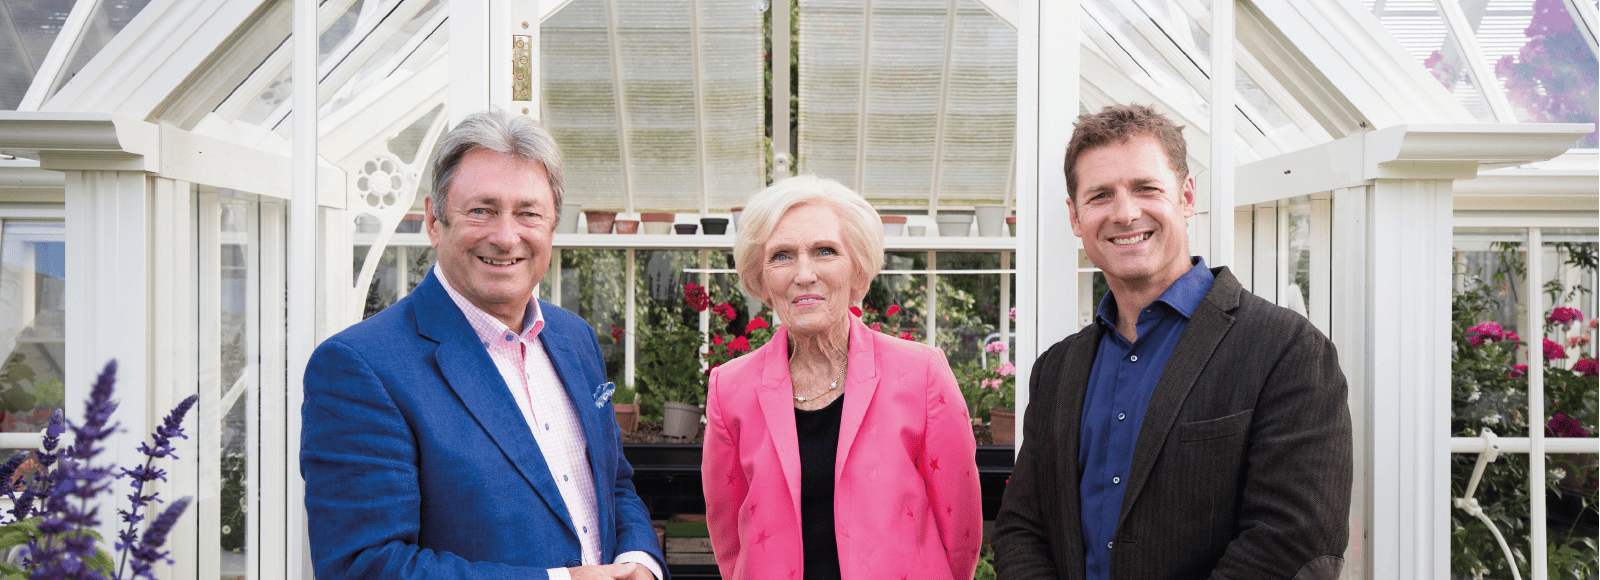 mary berry and alan titchmarsh alongside Tom Hall in front of a white victorian greenhouse